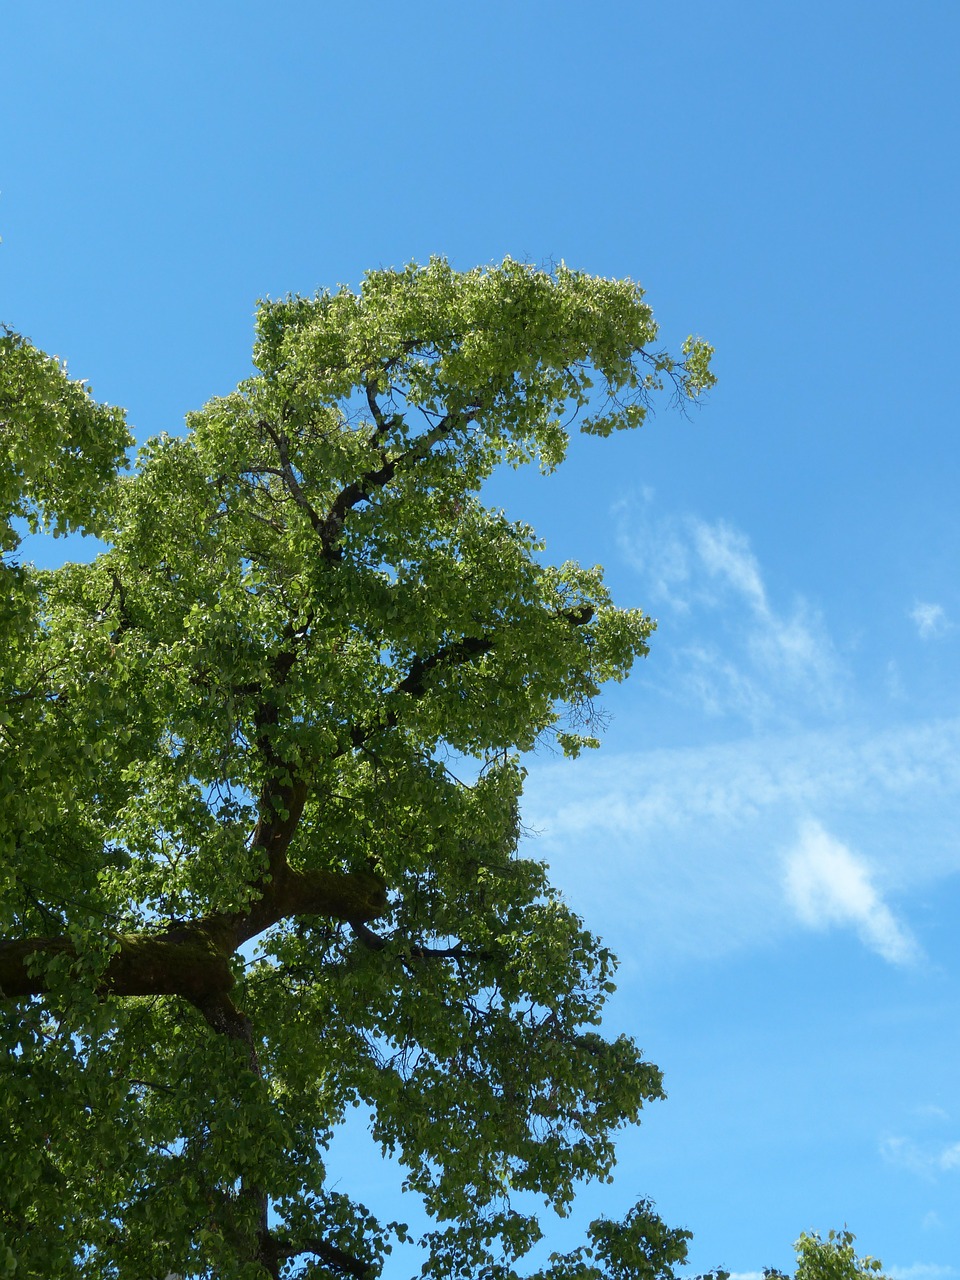 Download free photo of Tree,branch,sky,green,blue - from needpix.com